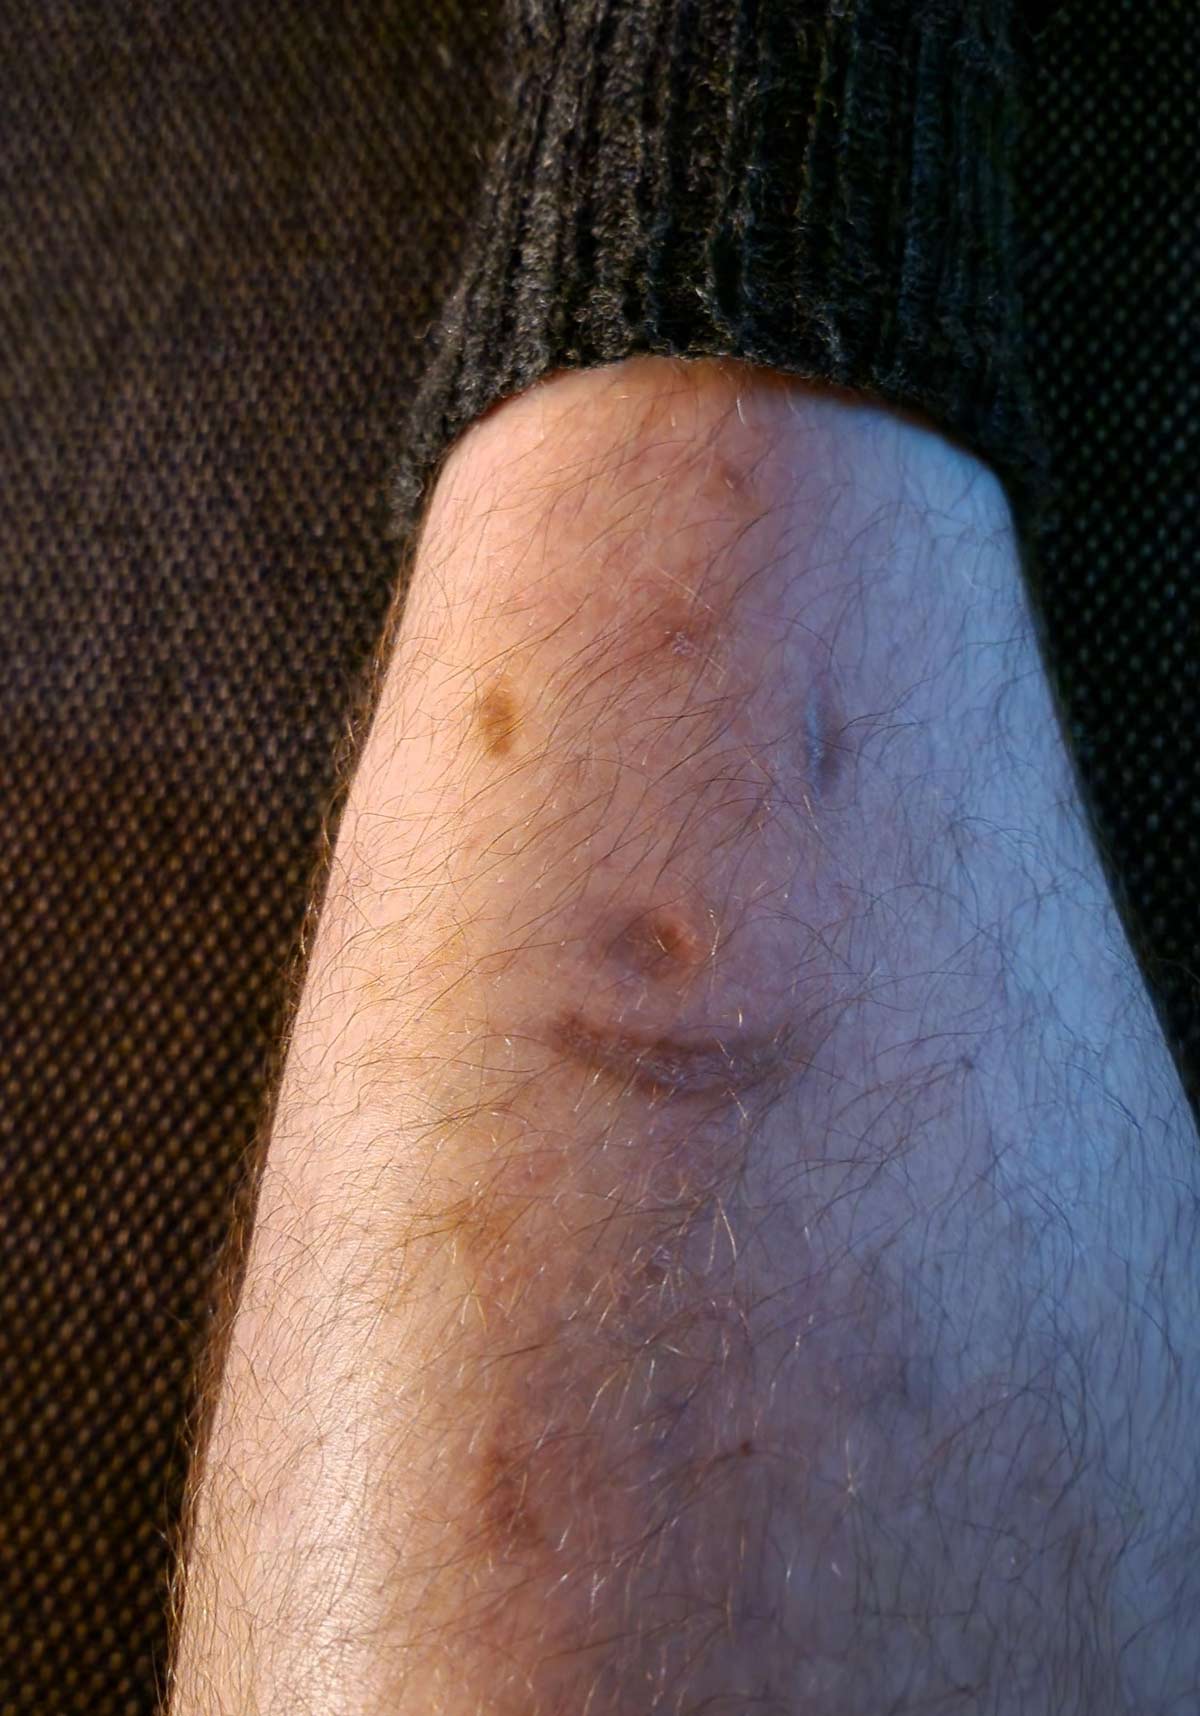 I have a scar smiley on my leg